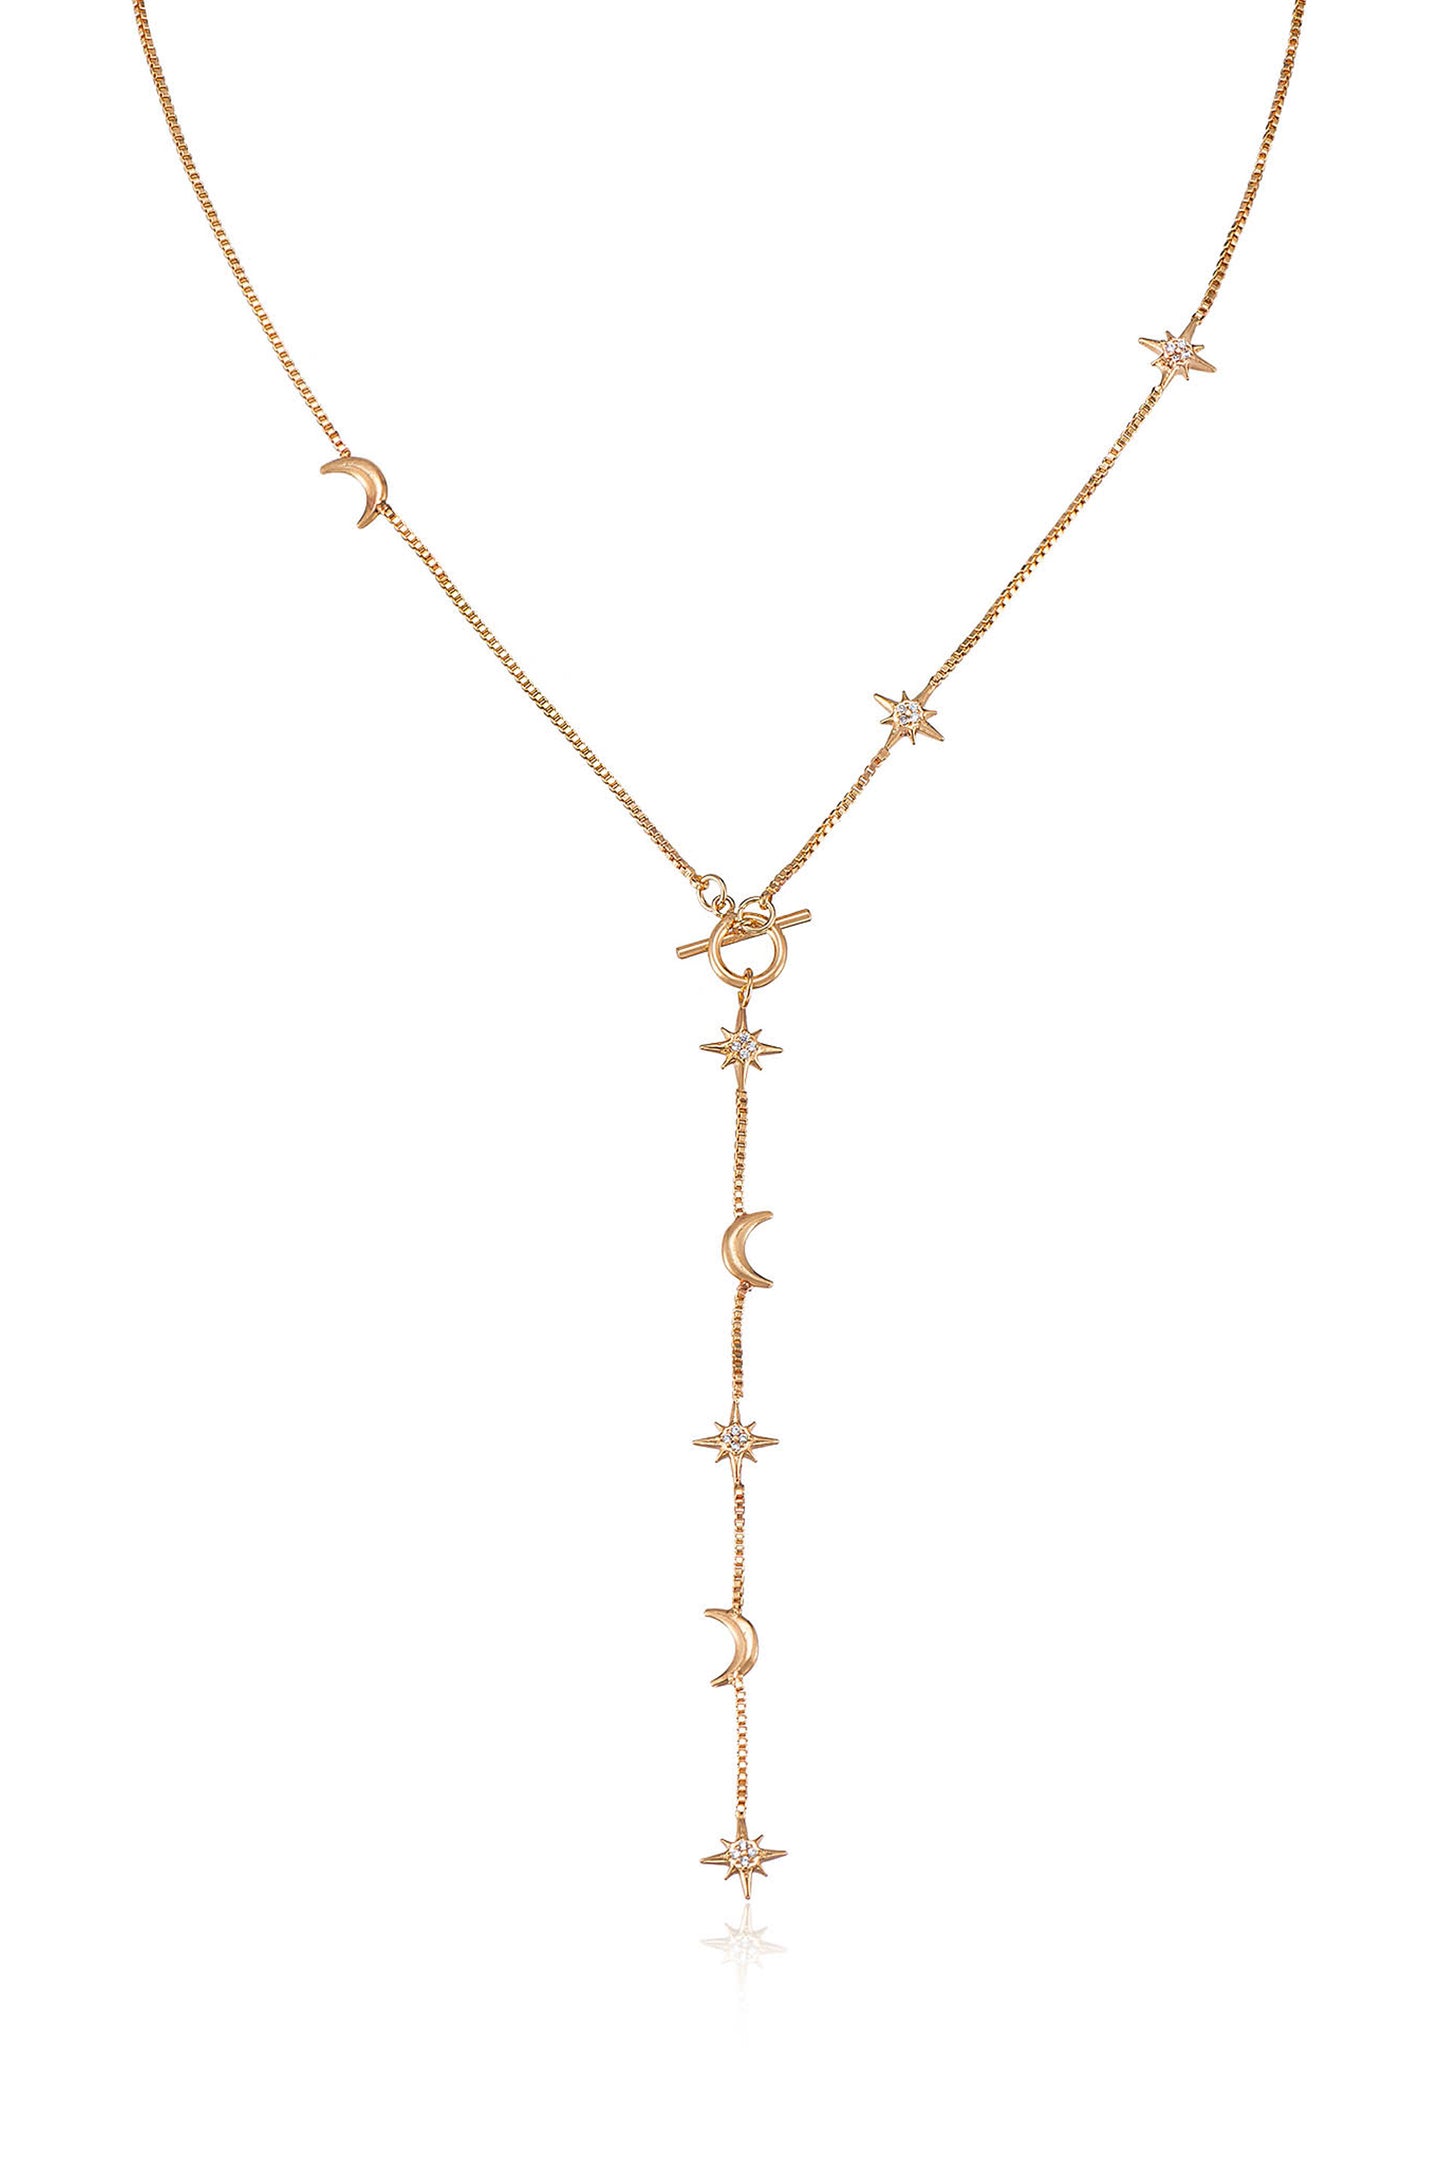 Delicate Celestial 18k Gold Plated Lariat Necklace